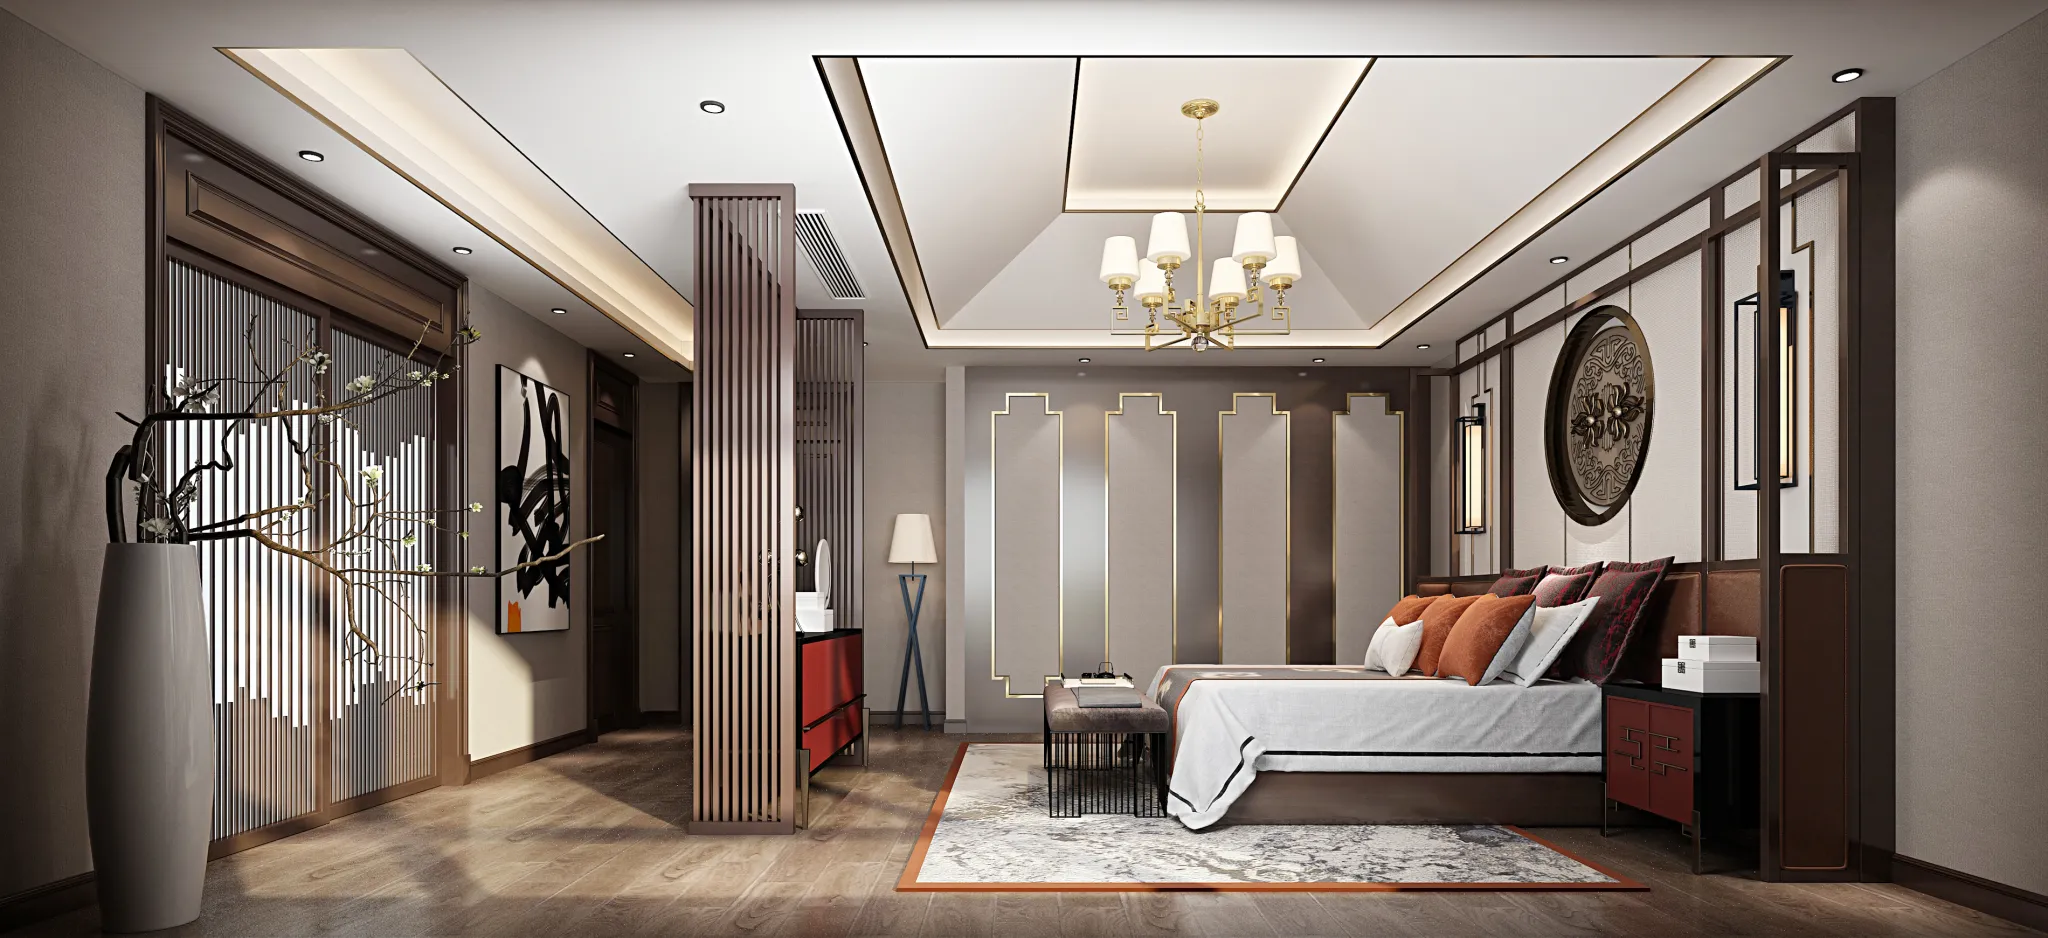 DESMOD INTERIOR 2021 (VRAY)/5. BEDROOM – 2. CHINESE STYLES – 069